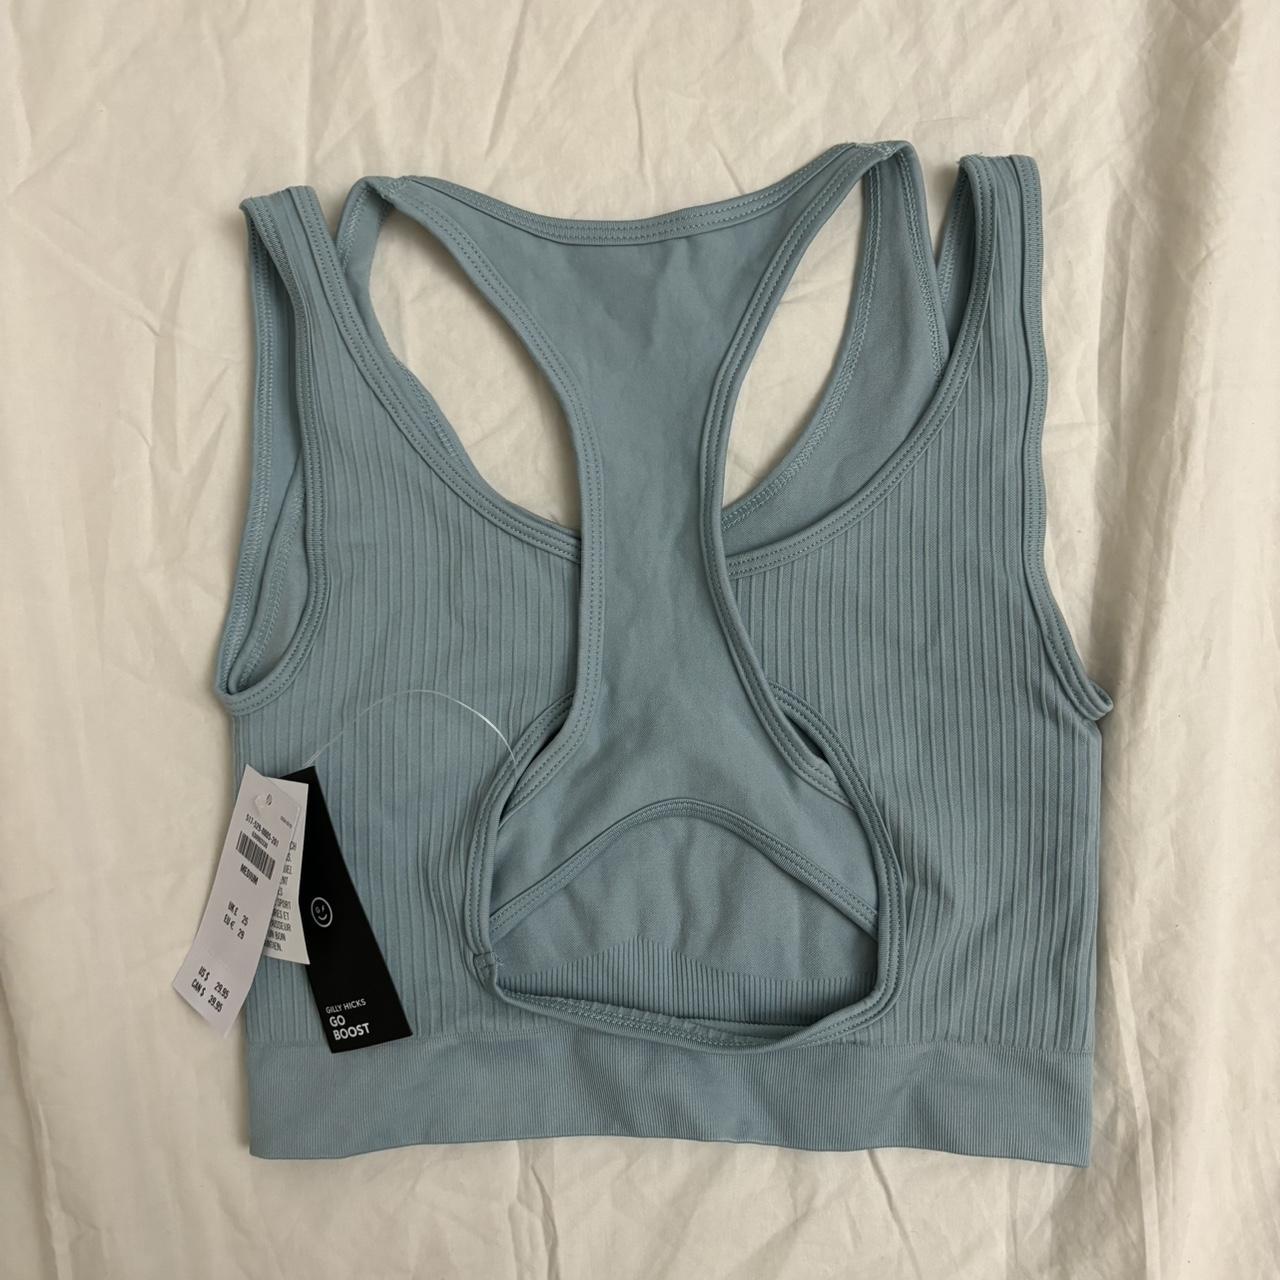 Gilly Hicks Sports Bra SMALL Hollister Heather Gray Racerback Lined  Athletic Gym - $11 - From Christine